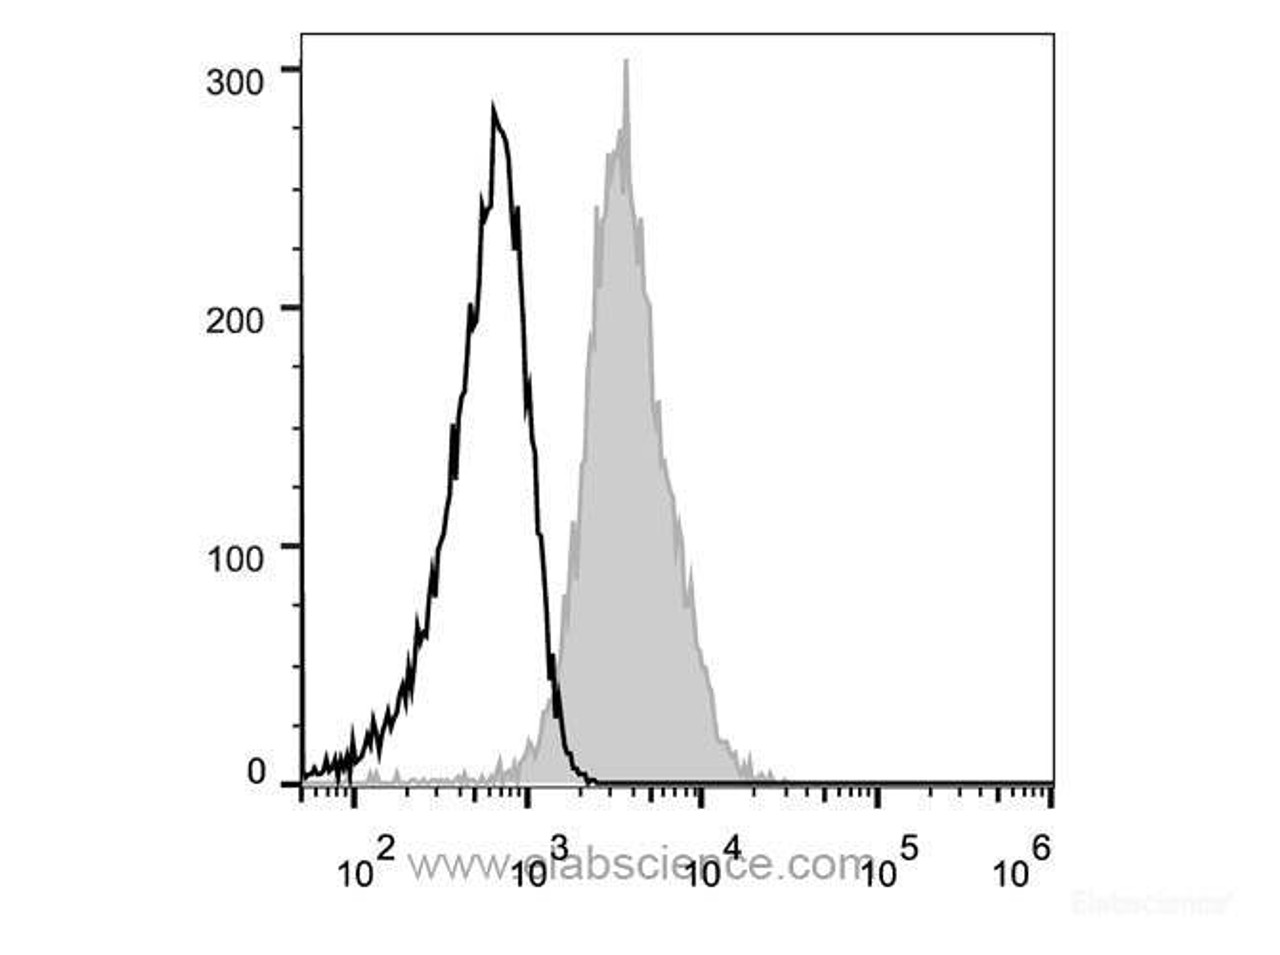 Human peripheral blood lymphocytes are stained with Anti-Human CD81 Monoclonal Antibody(FITC Conjugated)(filled gray histogram). Unstained lymphocytes (empty black histogram) are used as control.